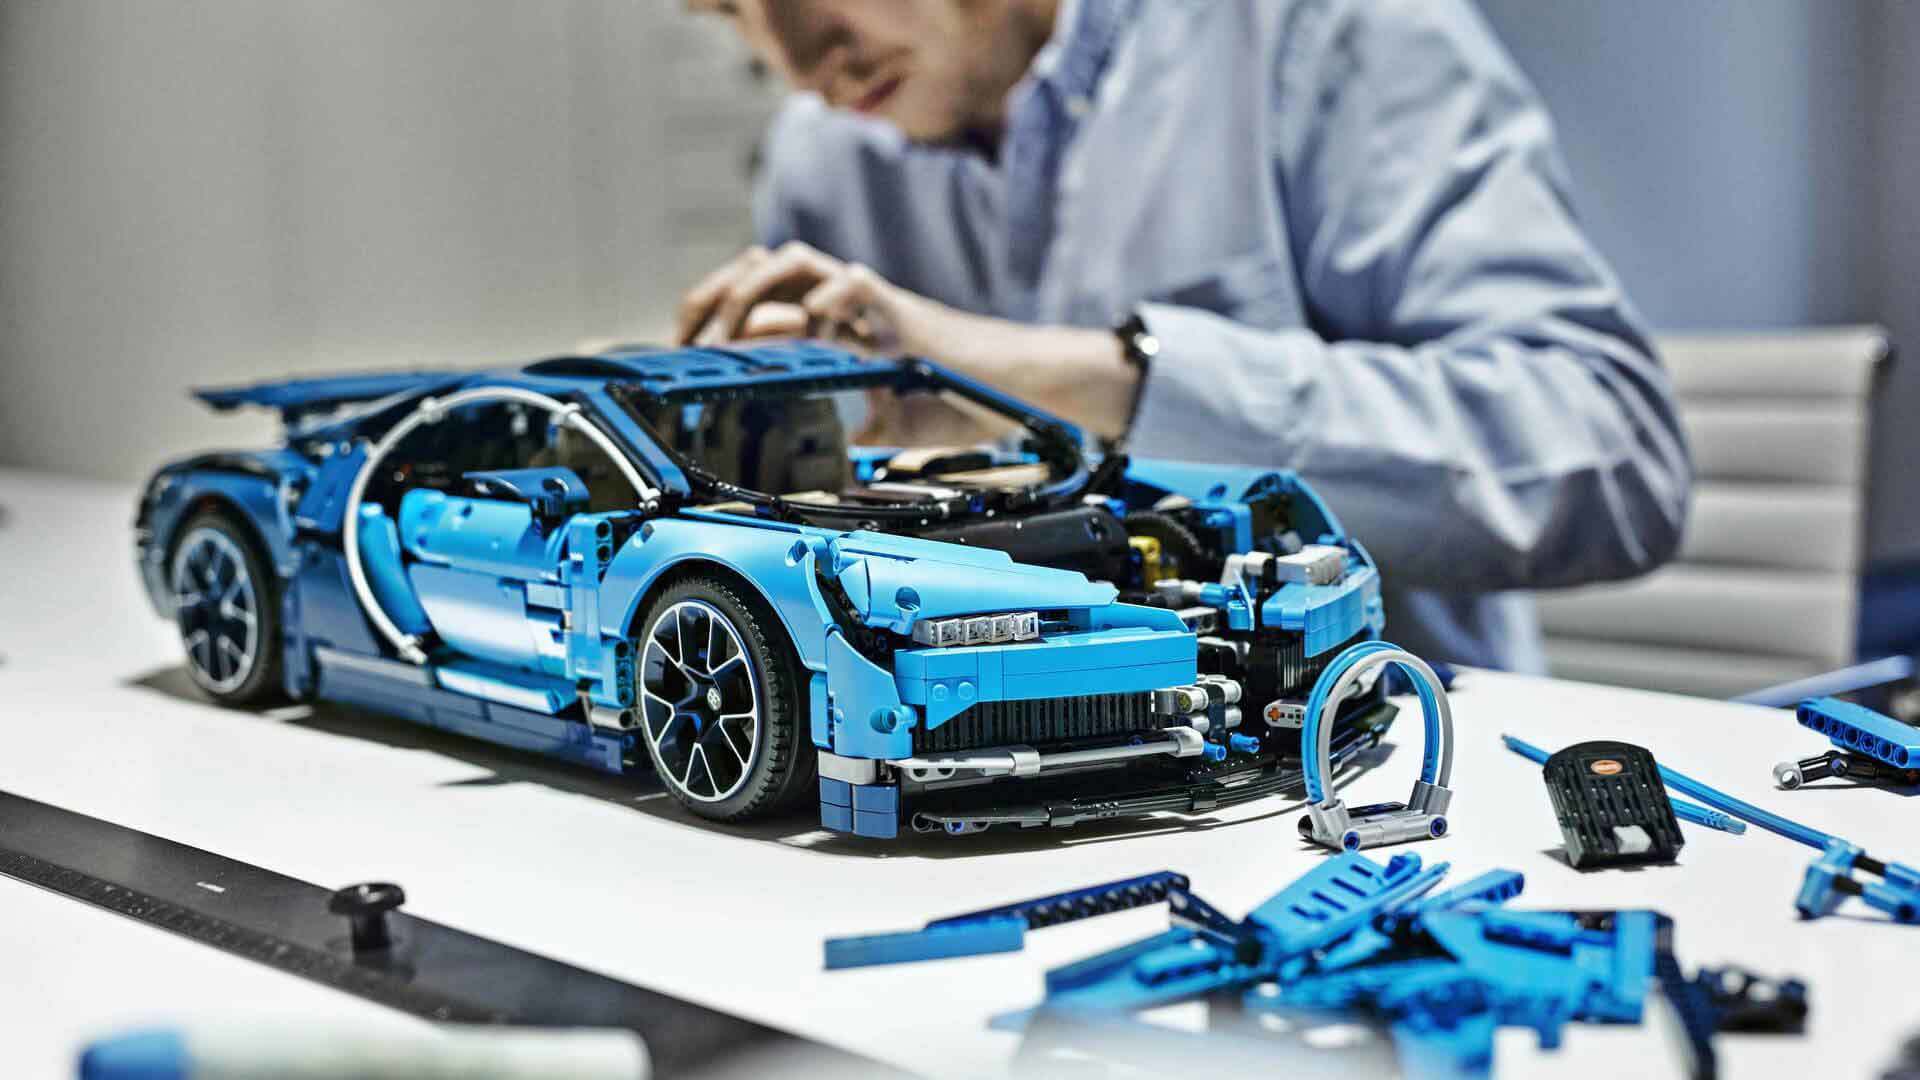 Lego Technic Bugatti Chiron revealed with 599 pieces, including movable engine parts